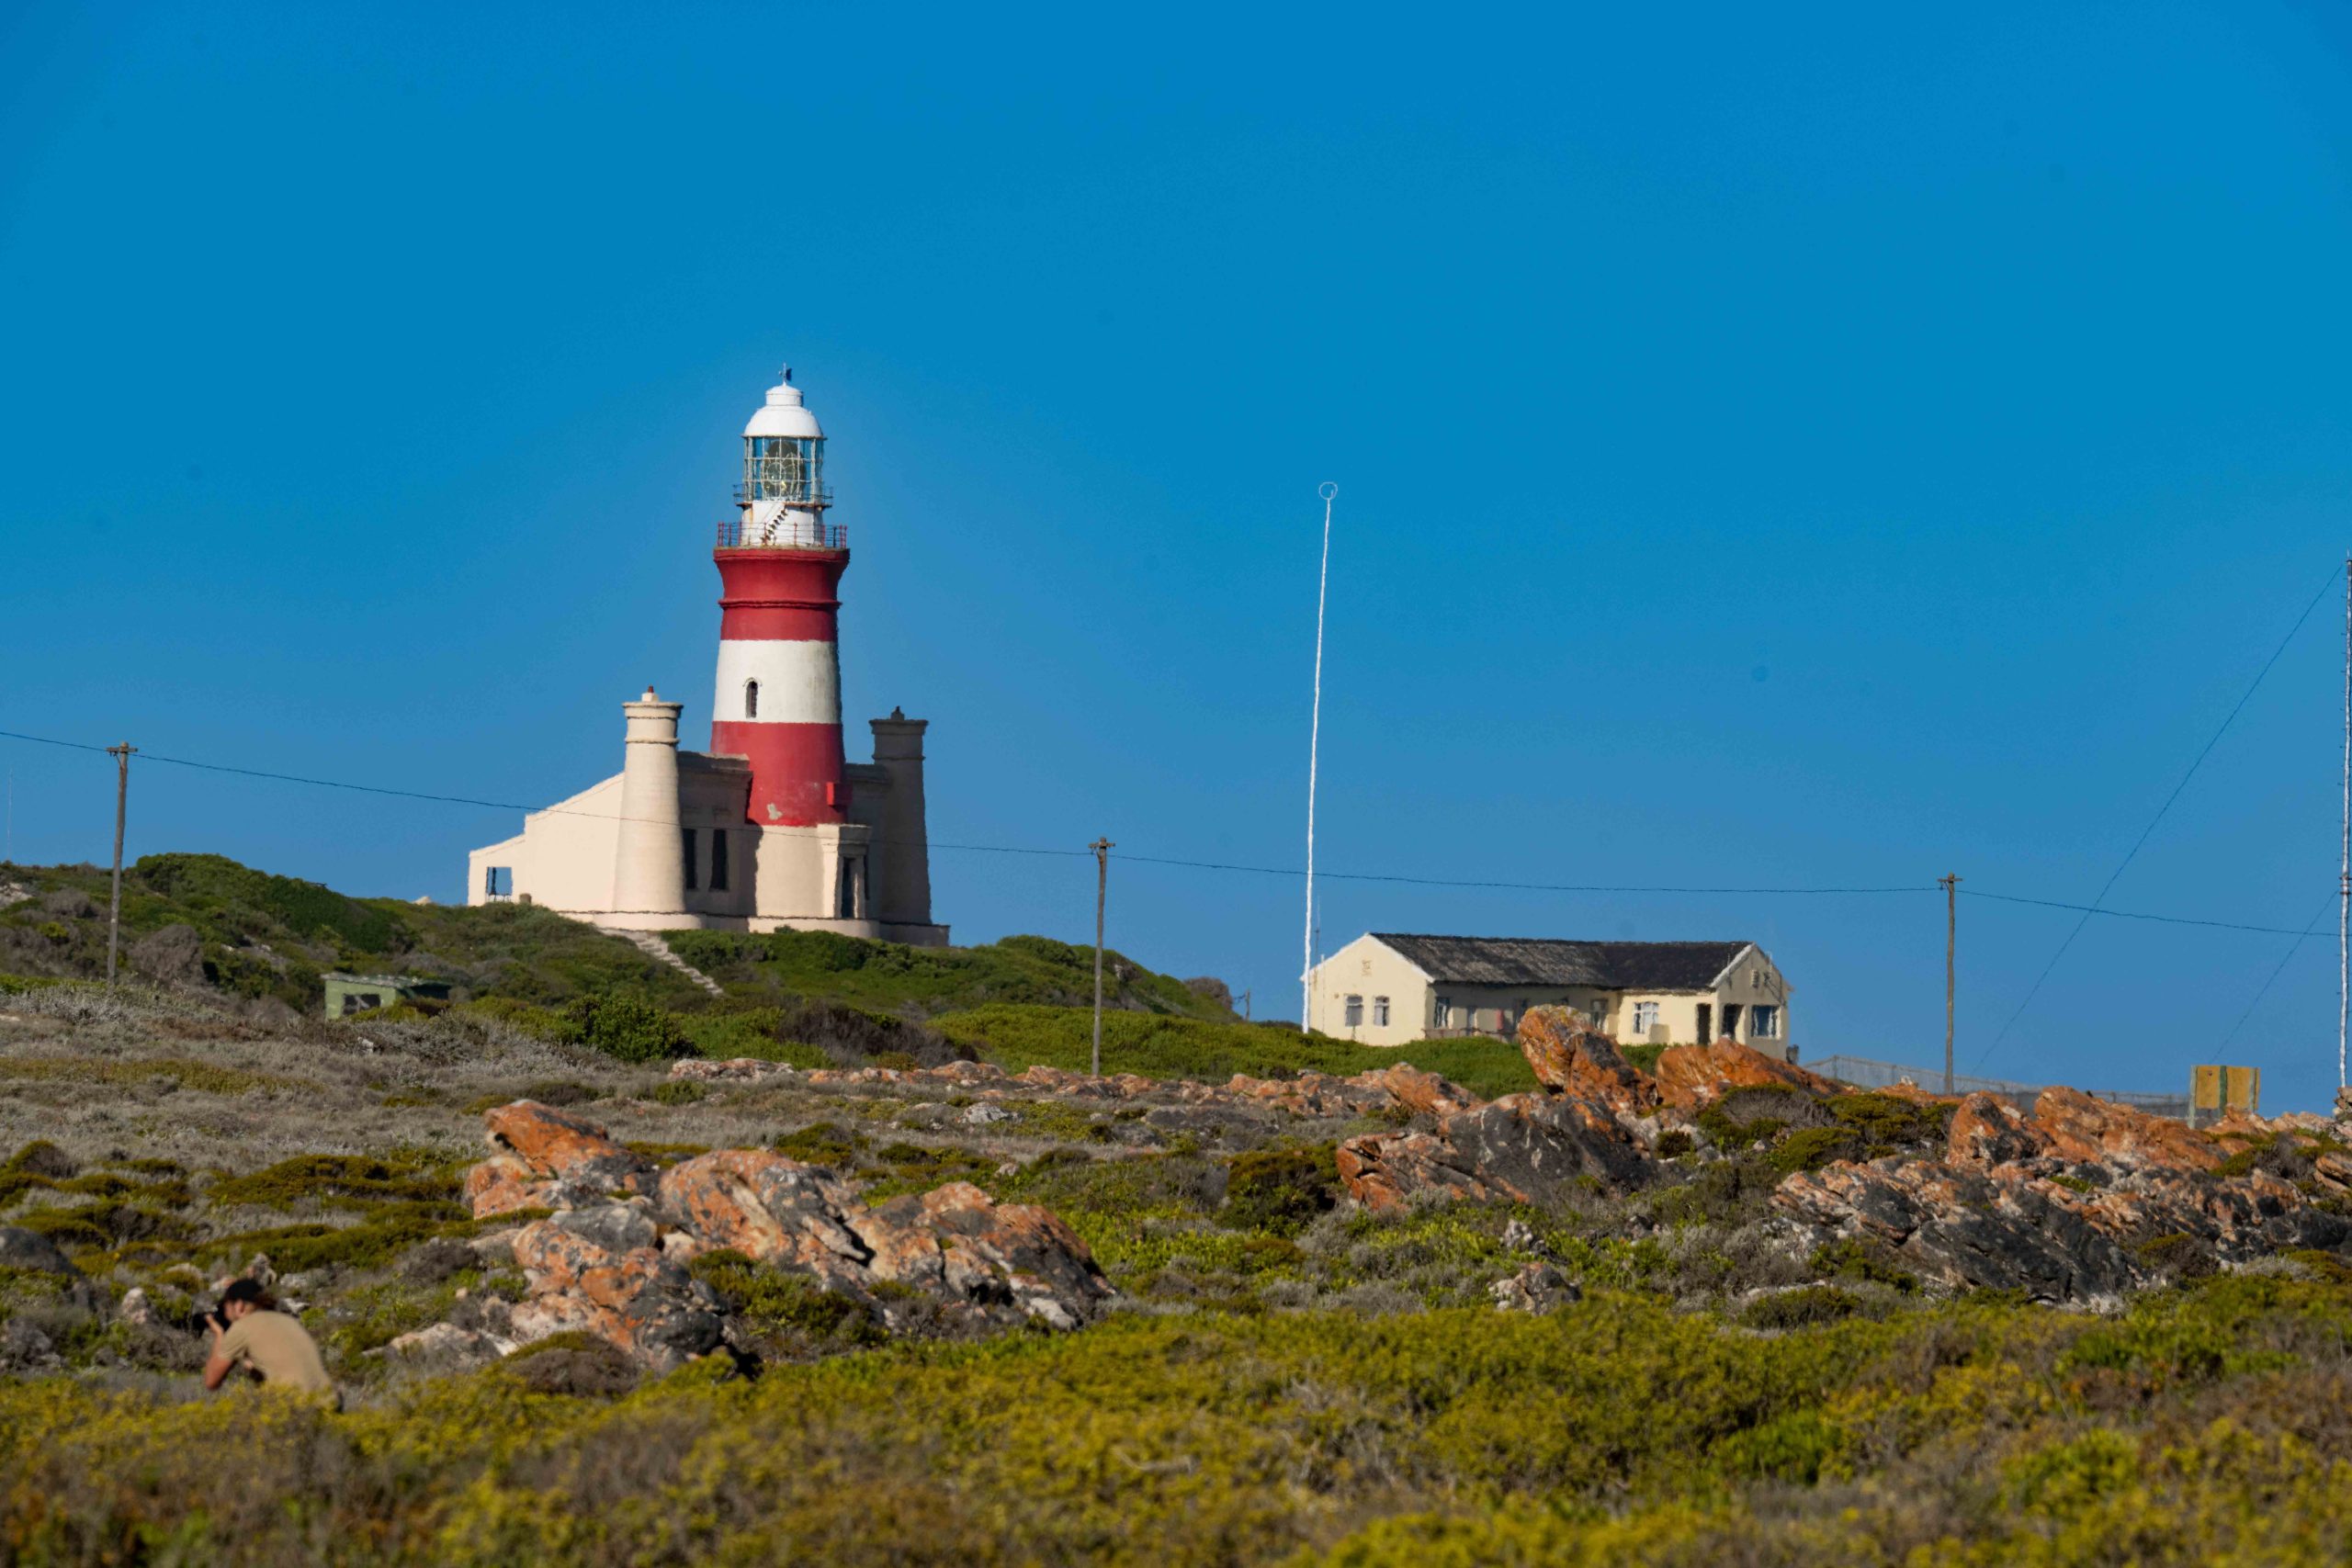 Cape Agulhas is located at the tip of Africa, where the Indian and Atlantic Ocean meet. This geographic significance makes it an awe-inspiring location for travellers seeking fishing activities, fresh seafood, sight-seeing, L'agulhas lighthouse, whale watching, and coastal nature reserves.